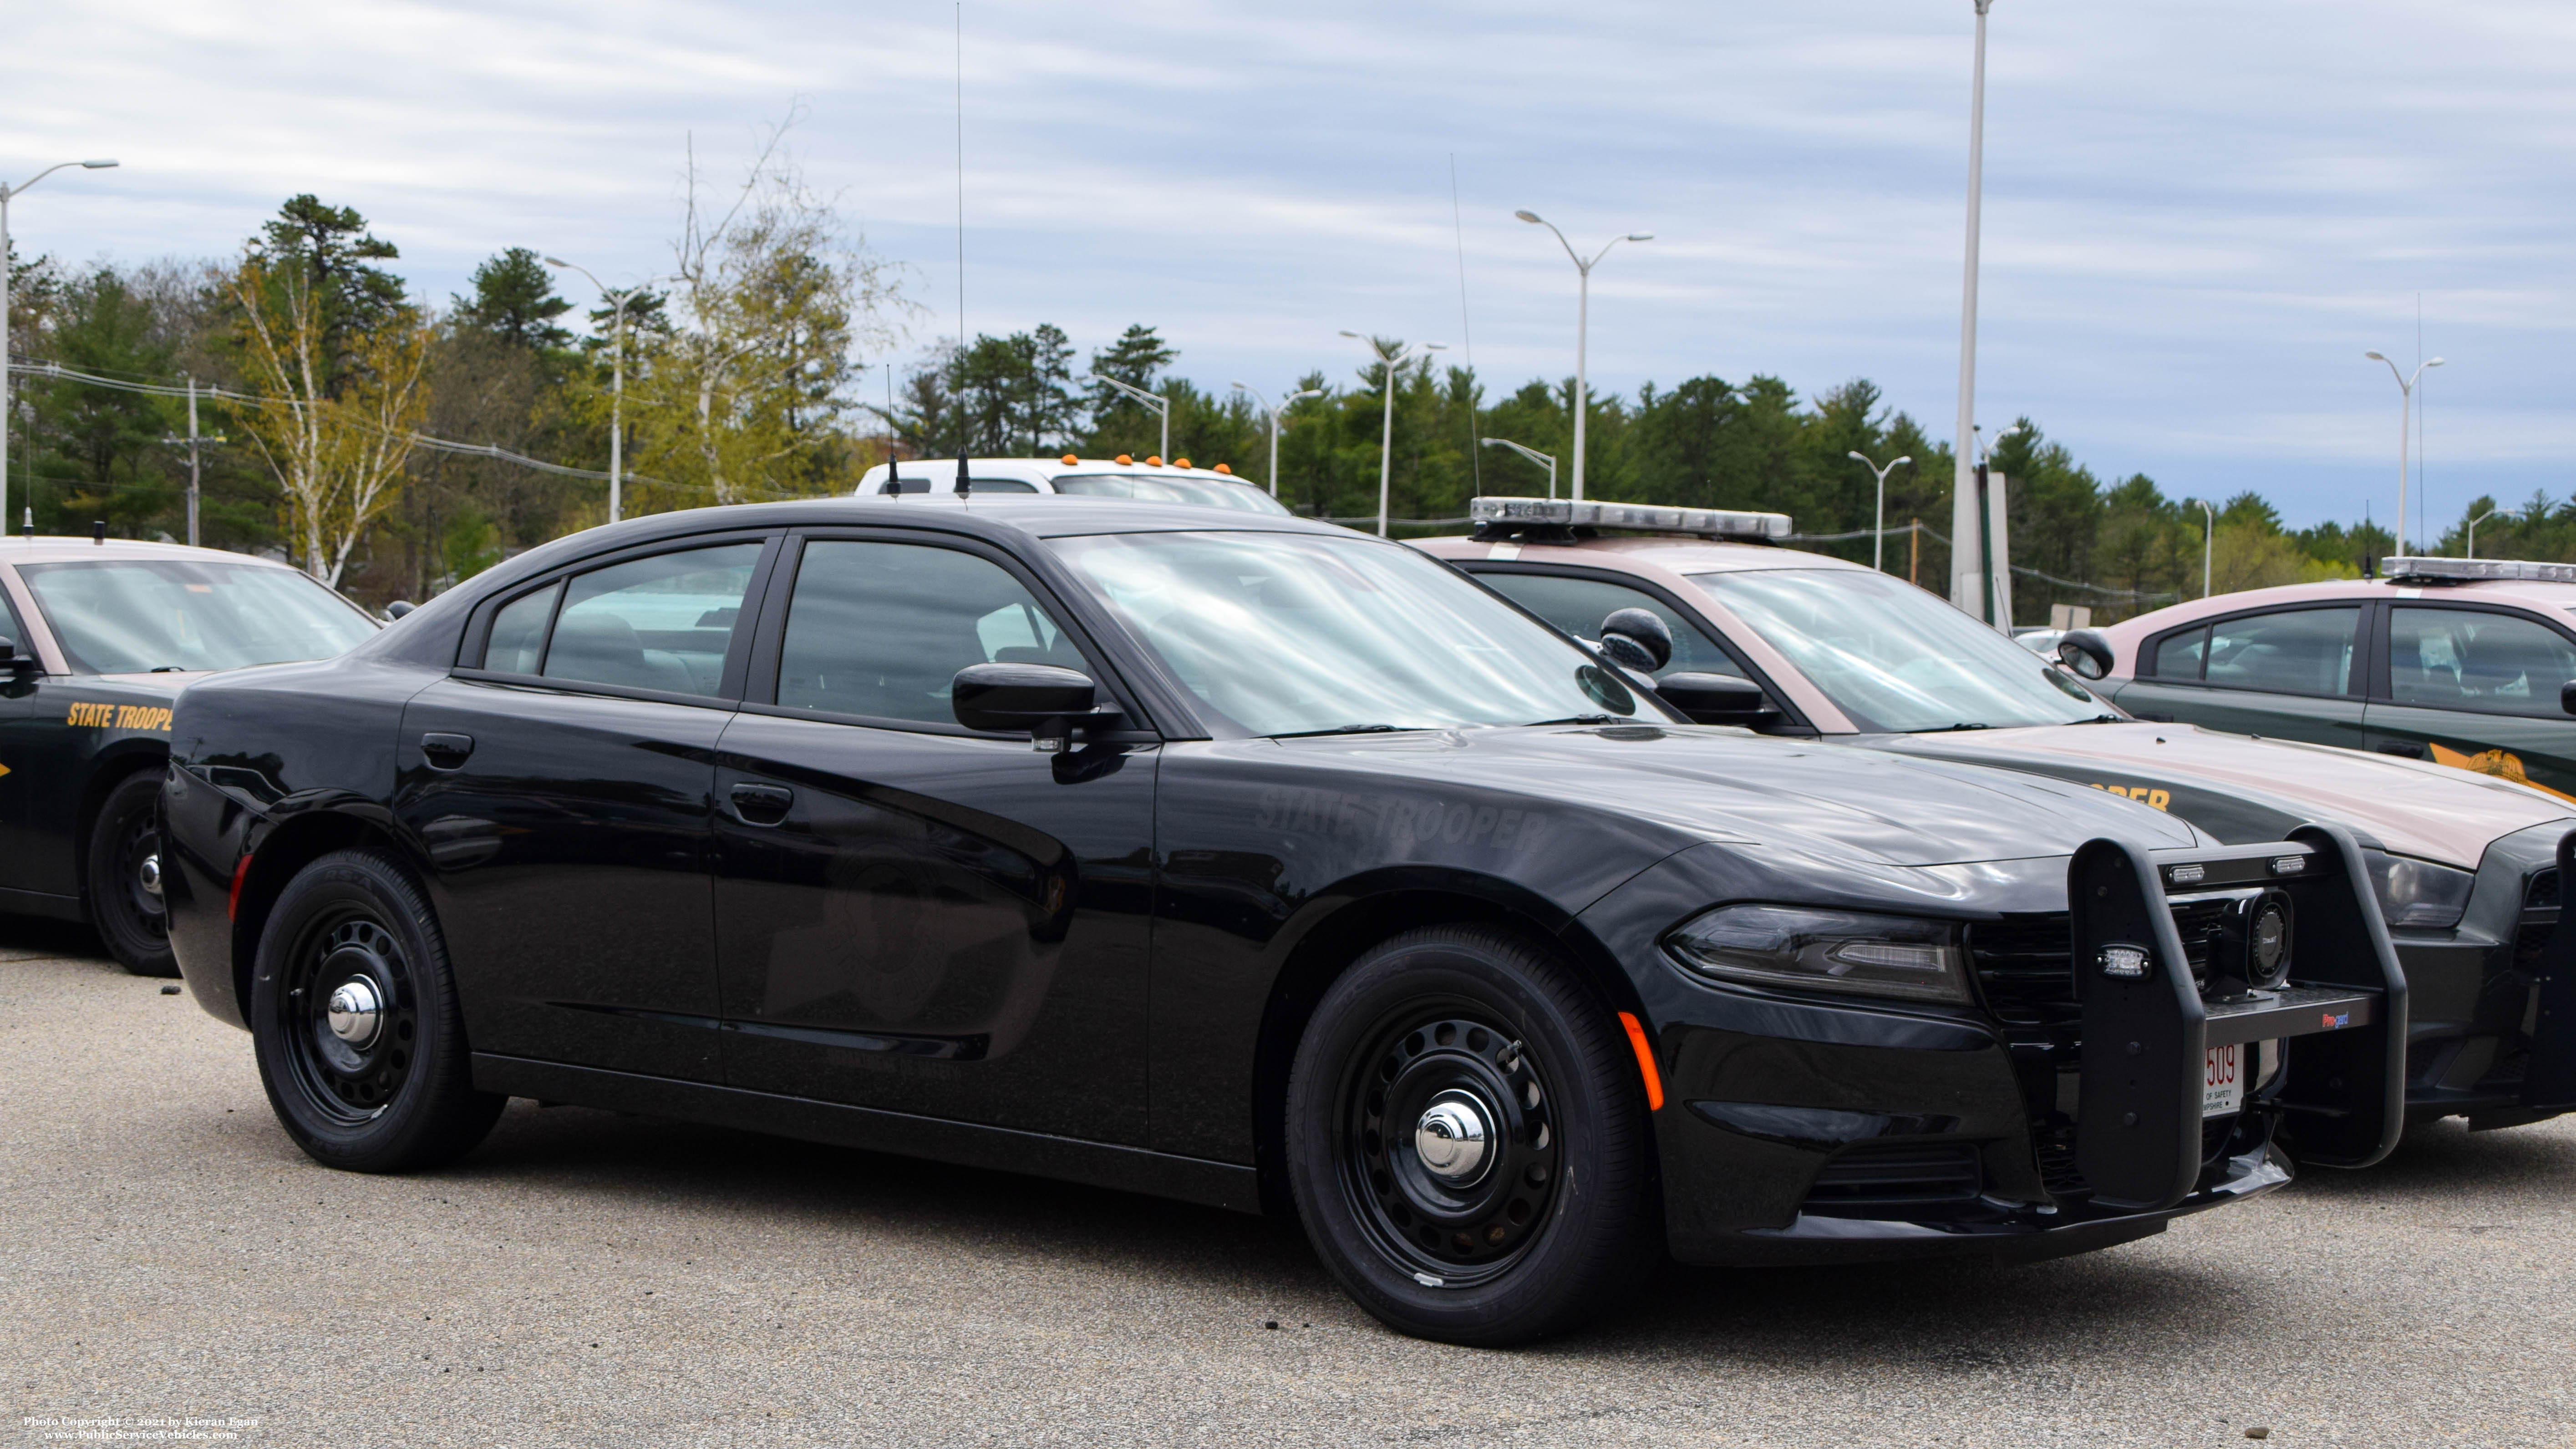 A photo  of New Hampshire State Police
            Cruiser 509, a 2020 Dodge Charger             taken by Kieran Egan